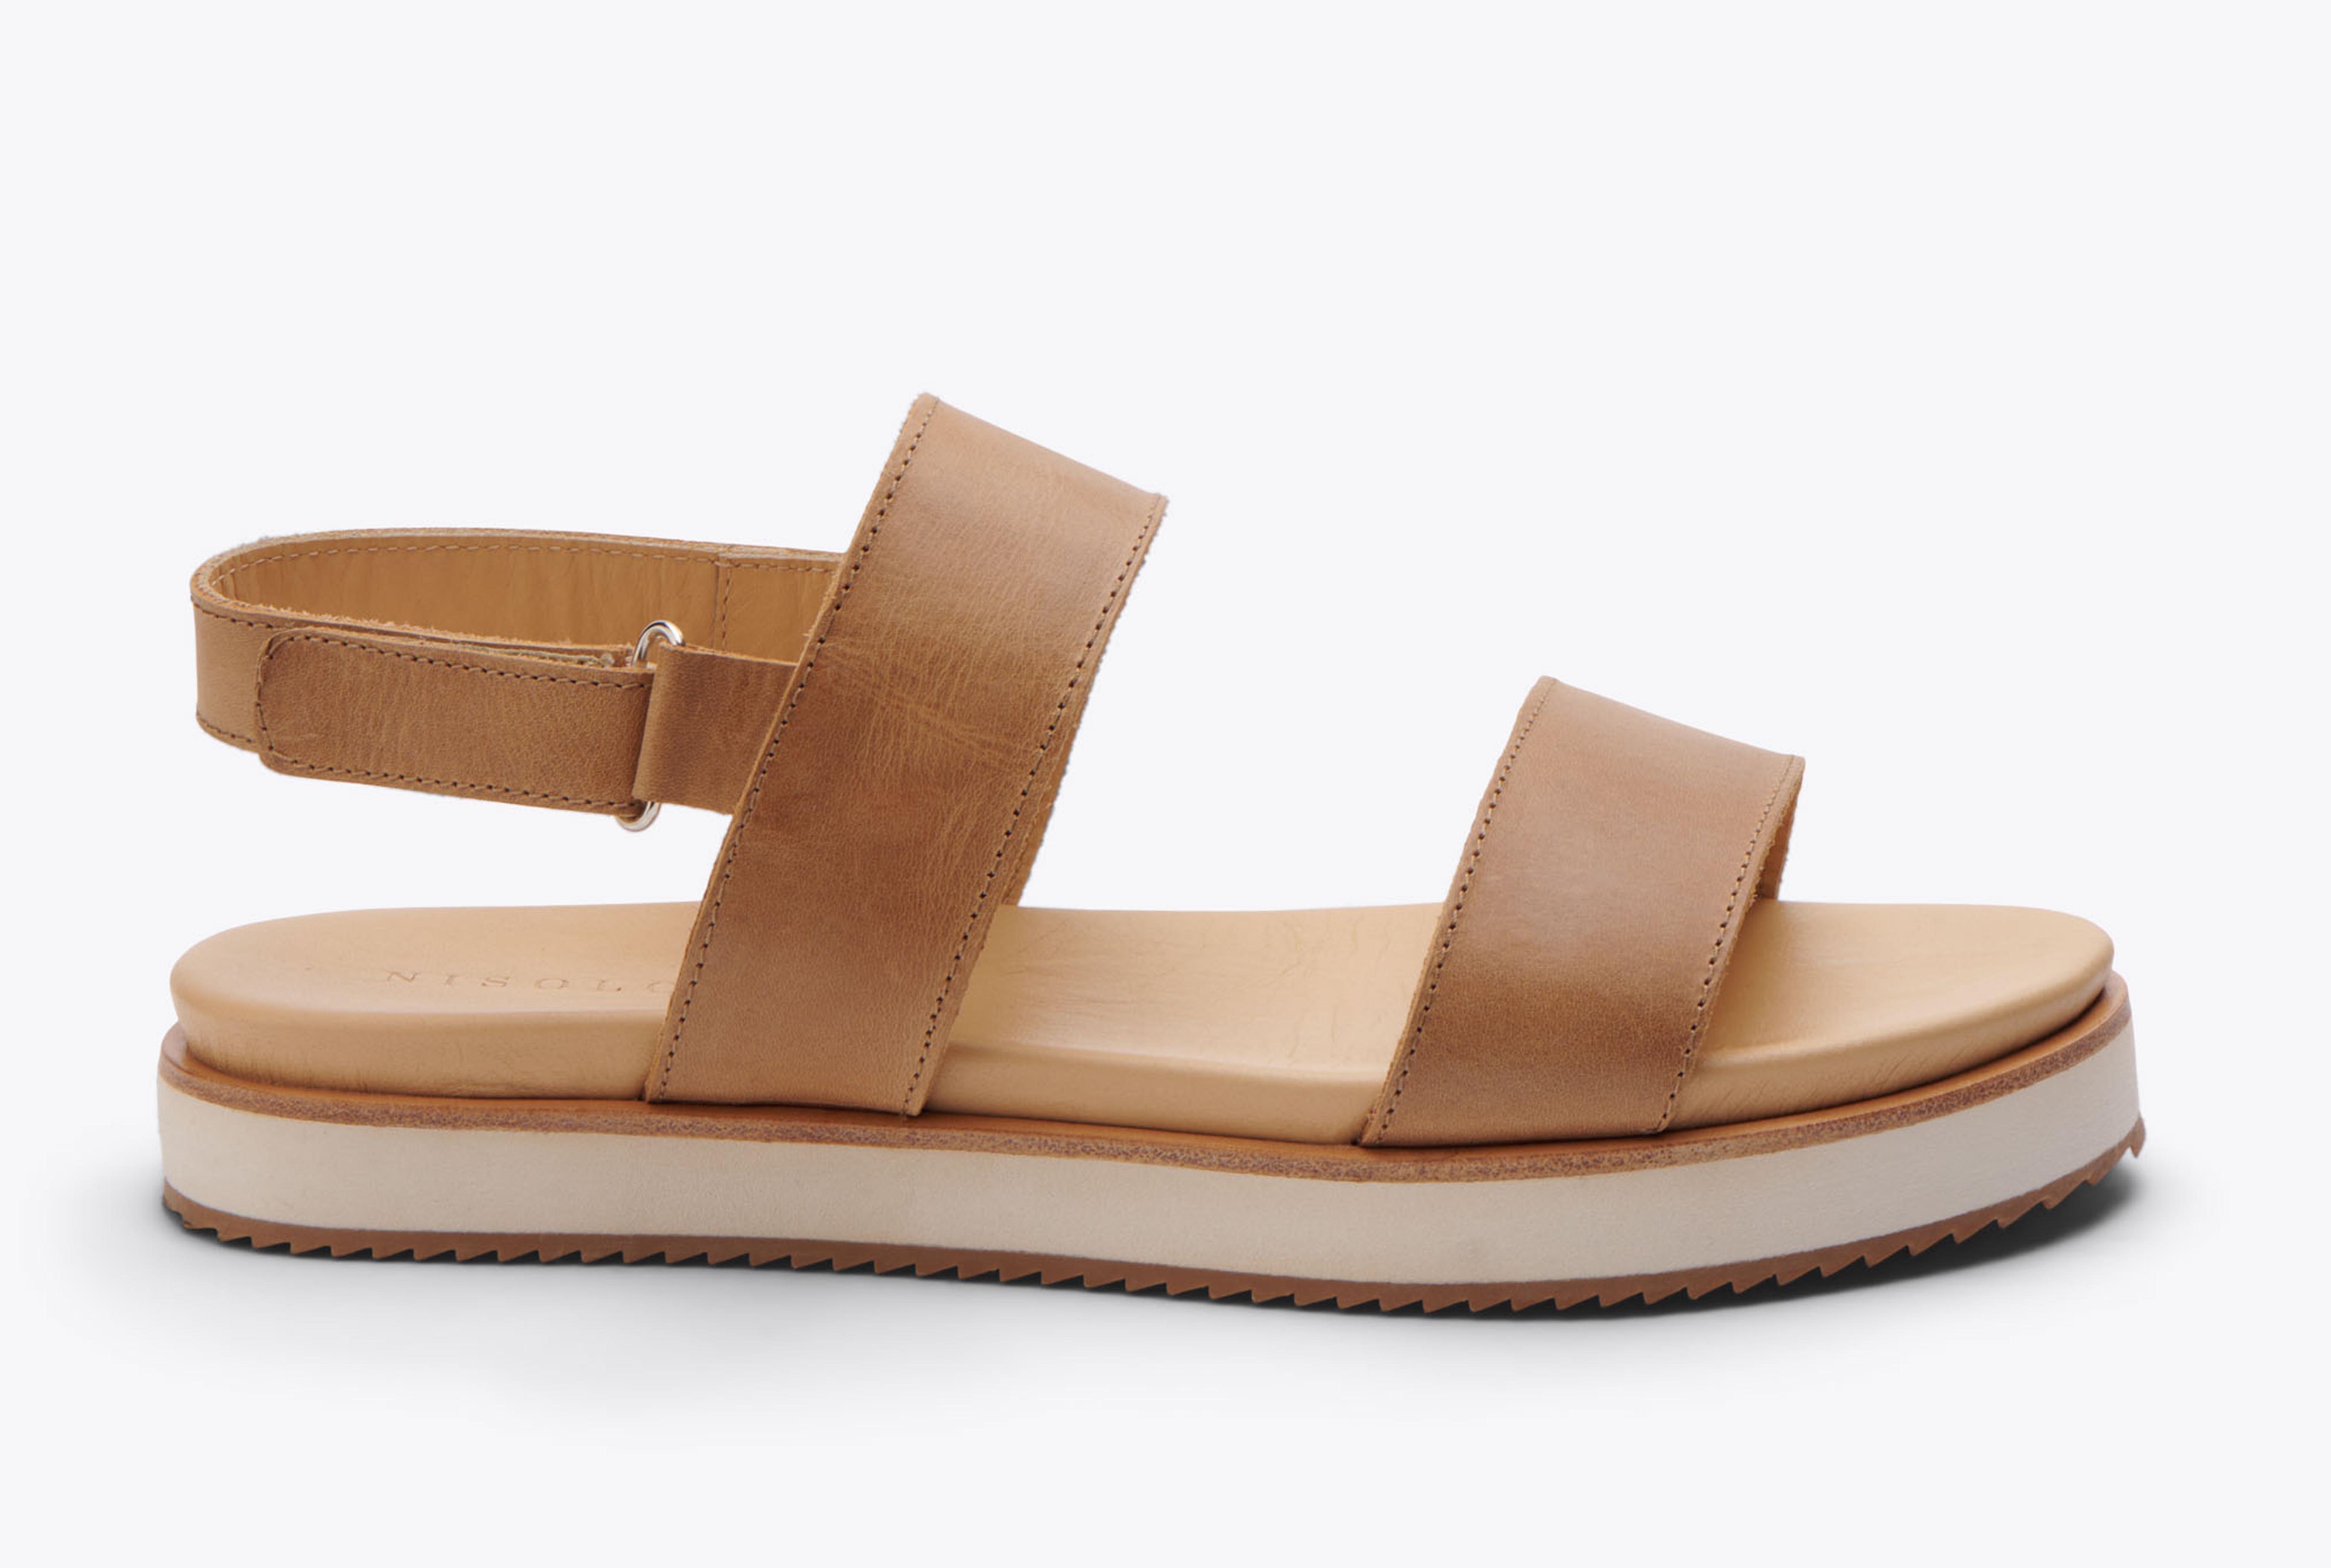 Nisolo Go-To Flatform Sandal Almond - Every Nisolo product is built on the foundation of comfort, function, and design. 